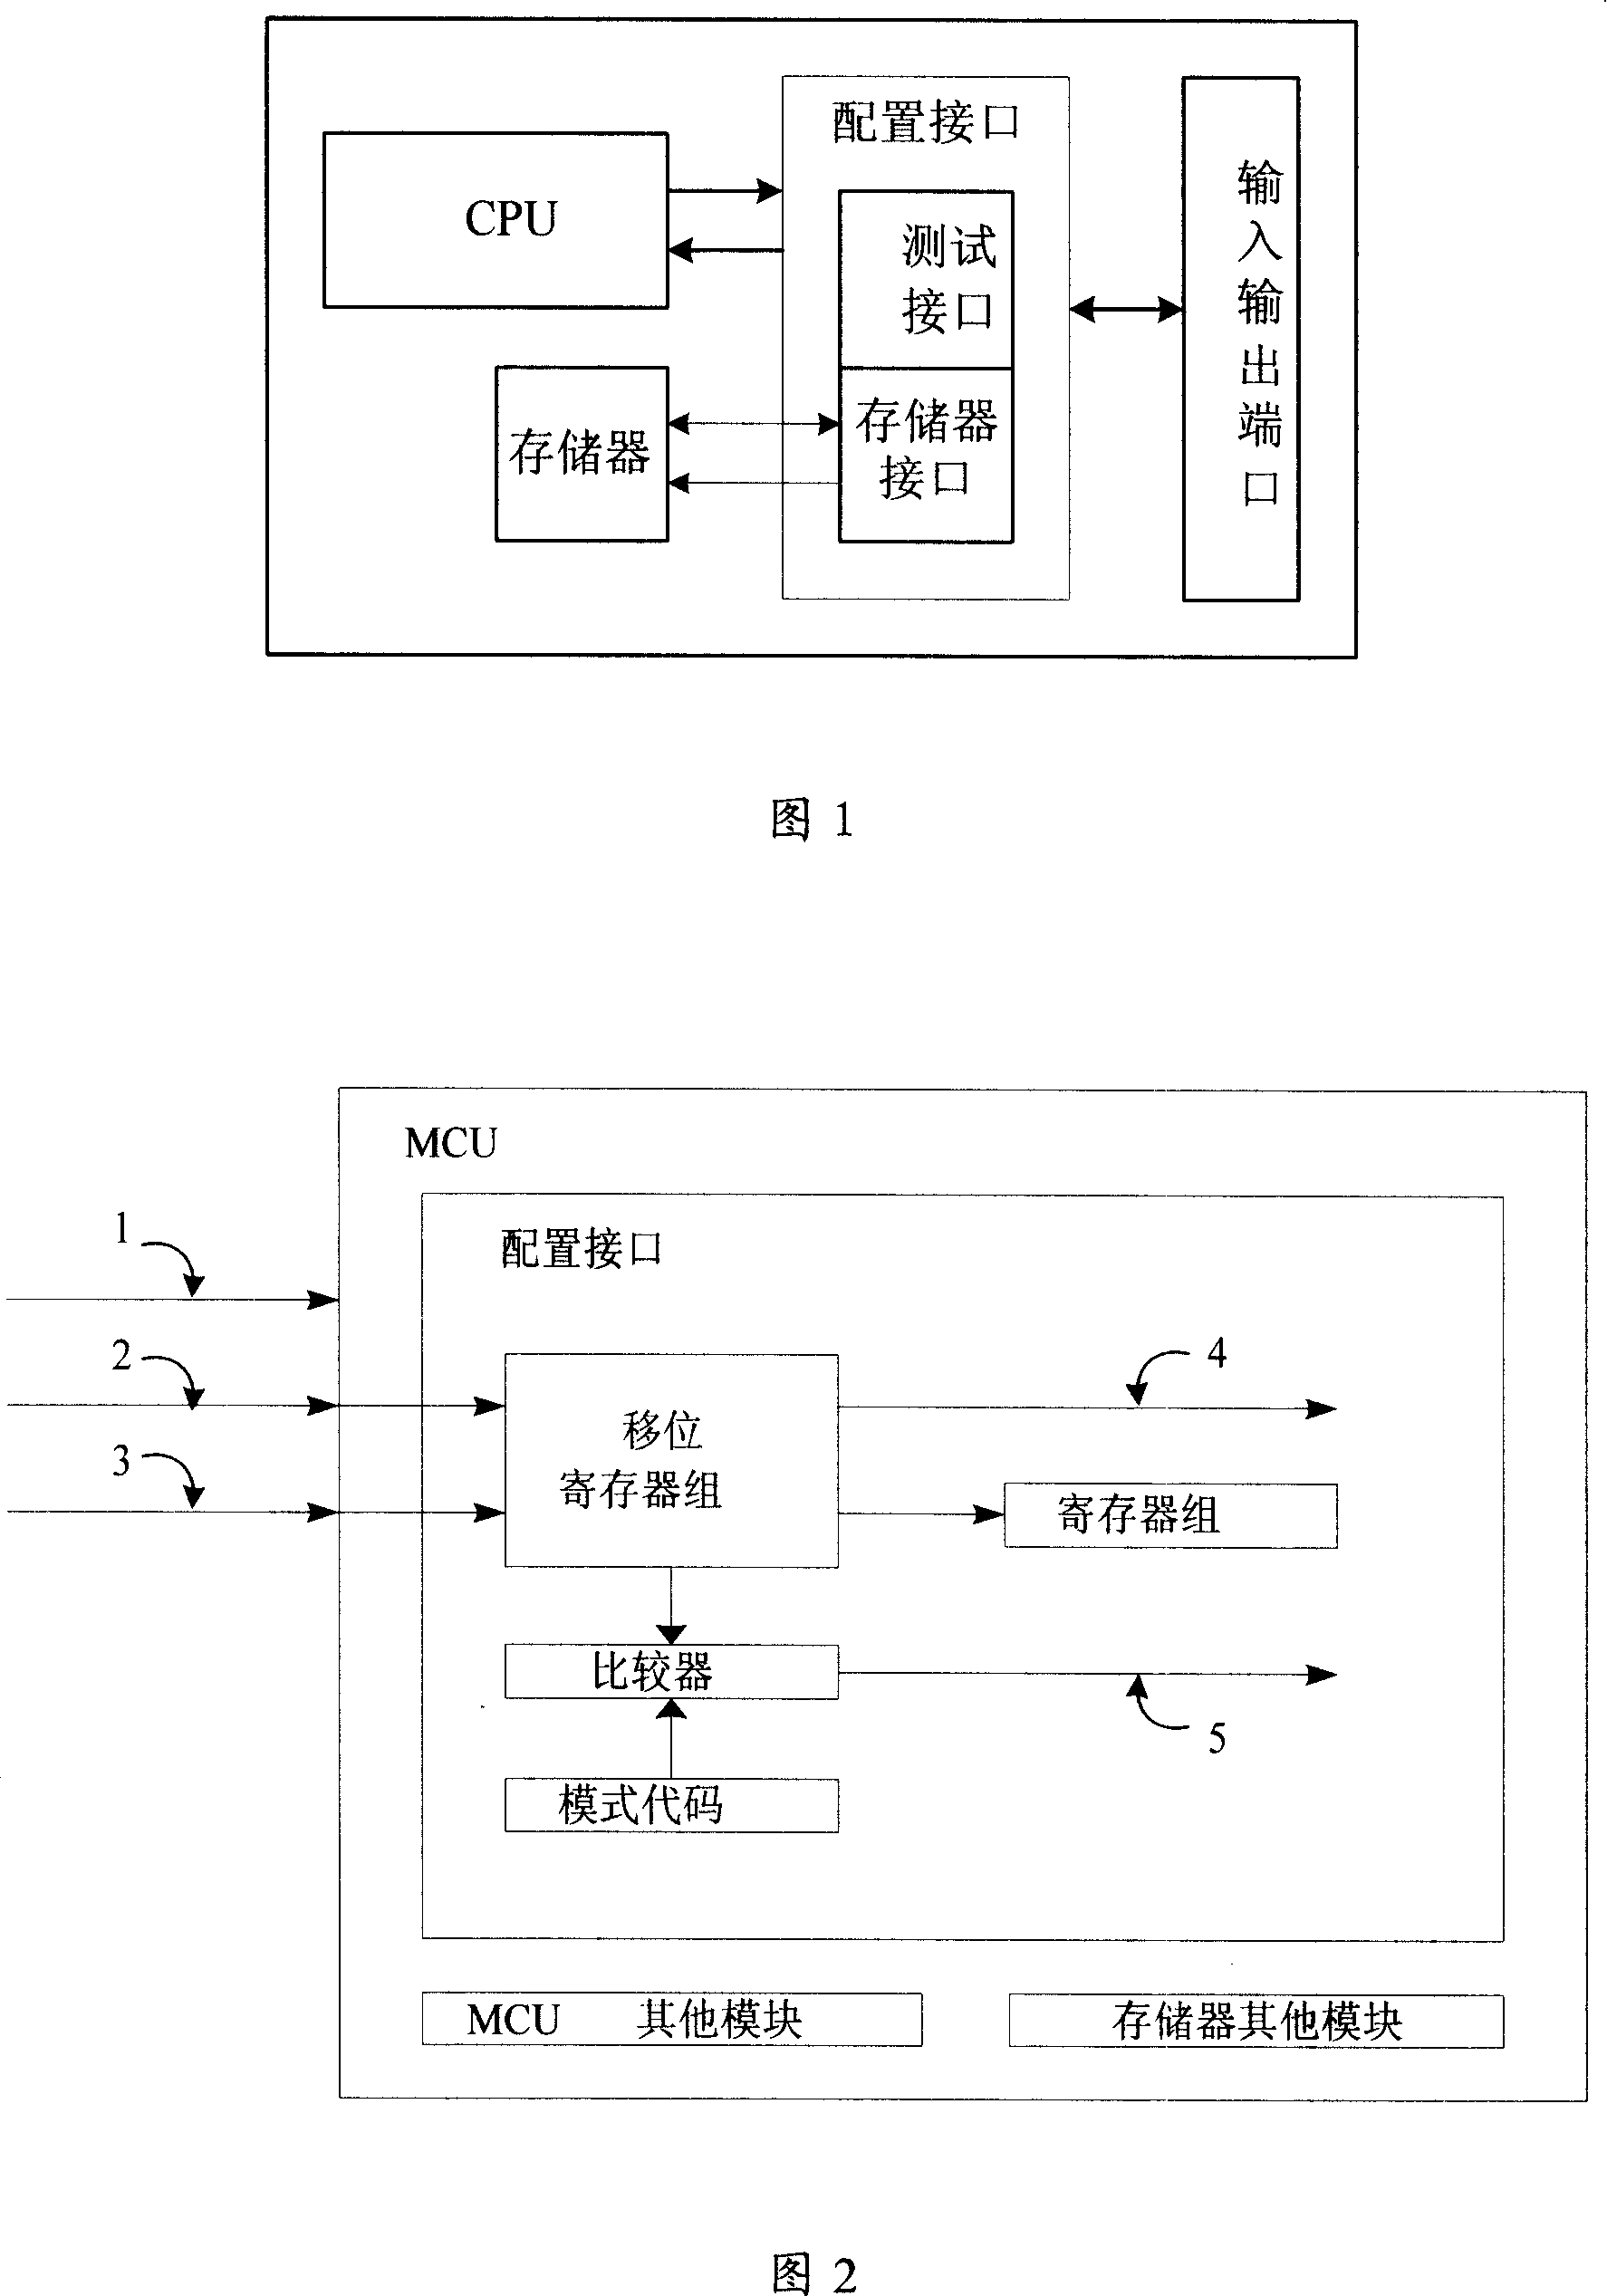 Operating method for configured interface of microcontroller